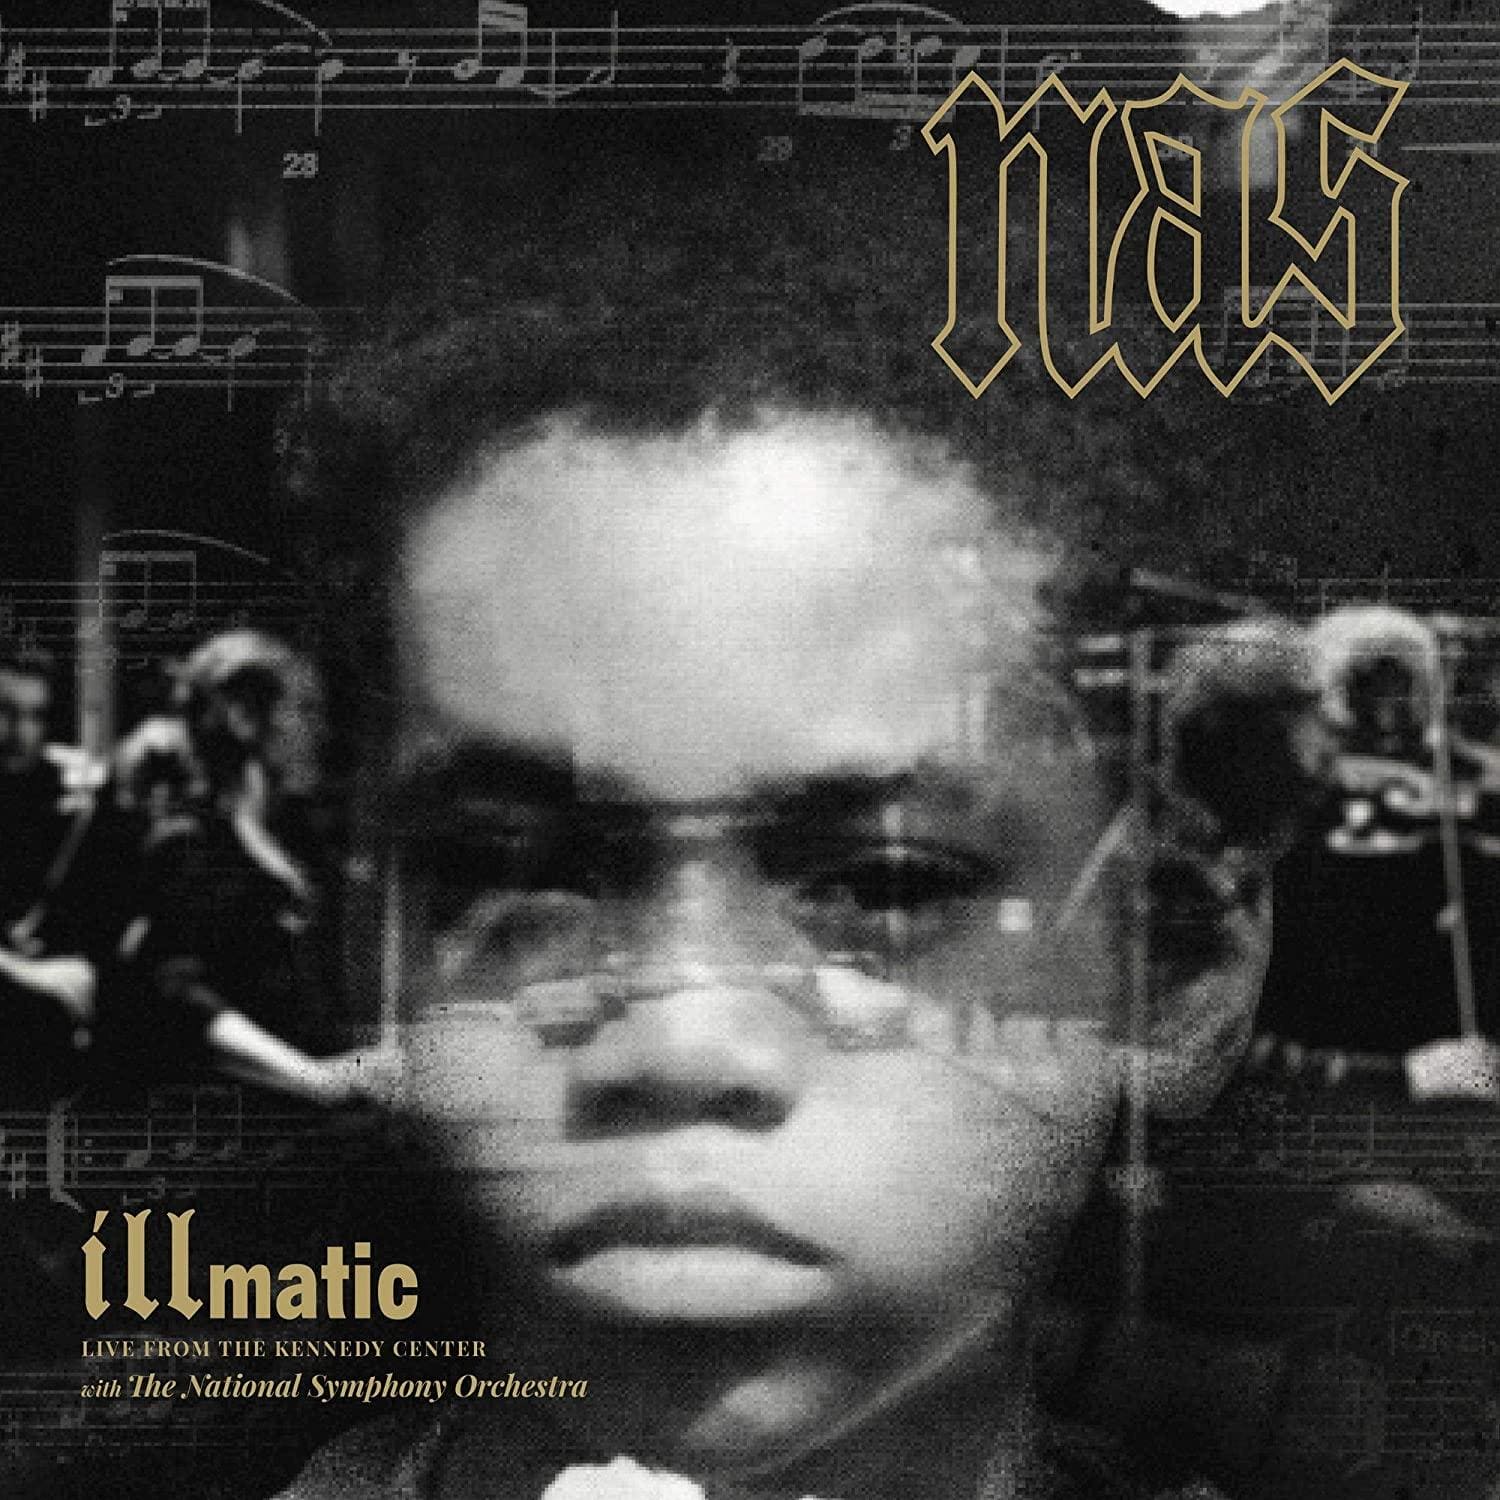 NAS with NATIONAL SYNPHONY ORCHESTRA - Illmatic (Live From The Kennedy Center) Vinyl - JWrayRecords